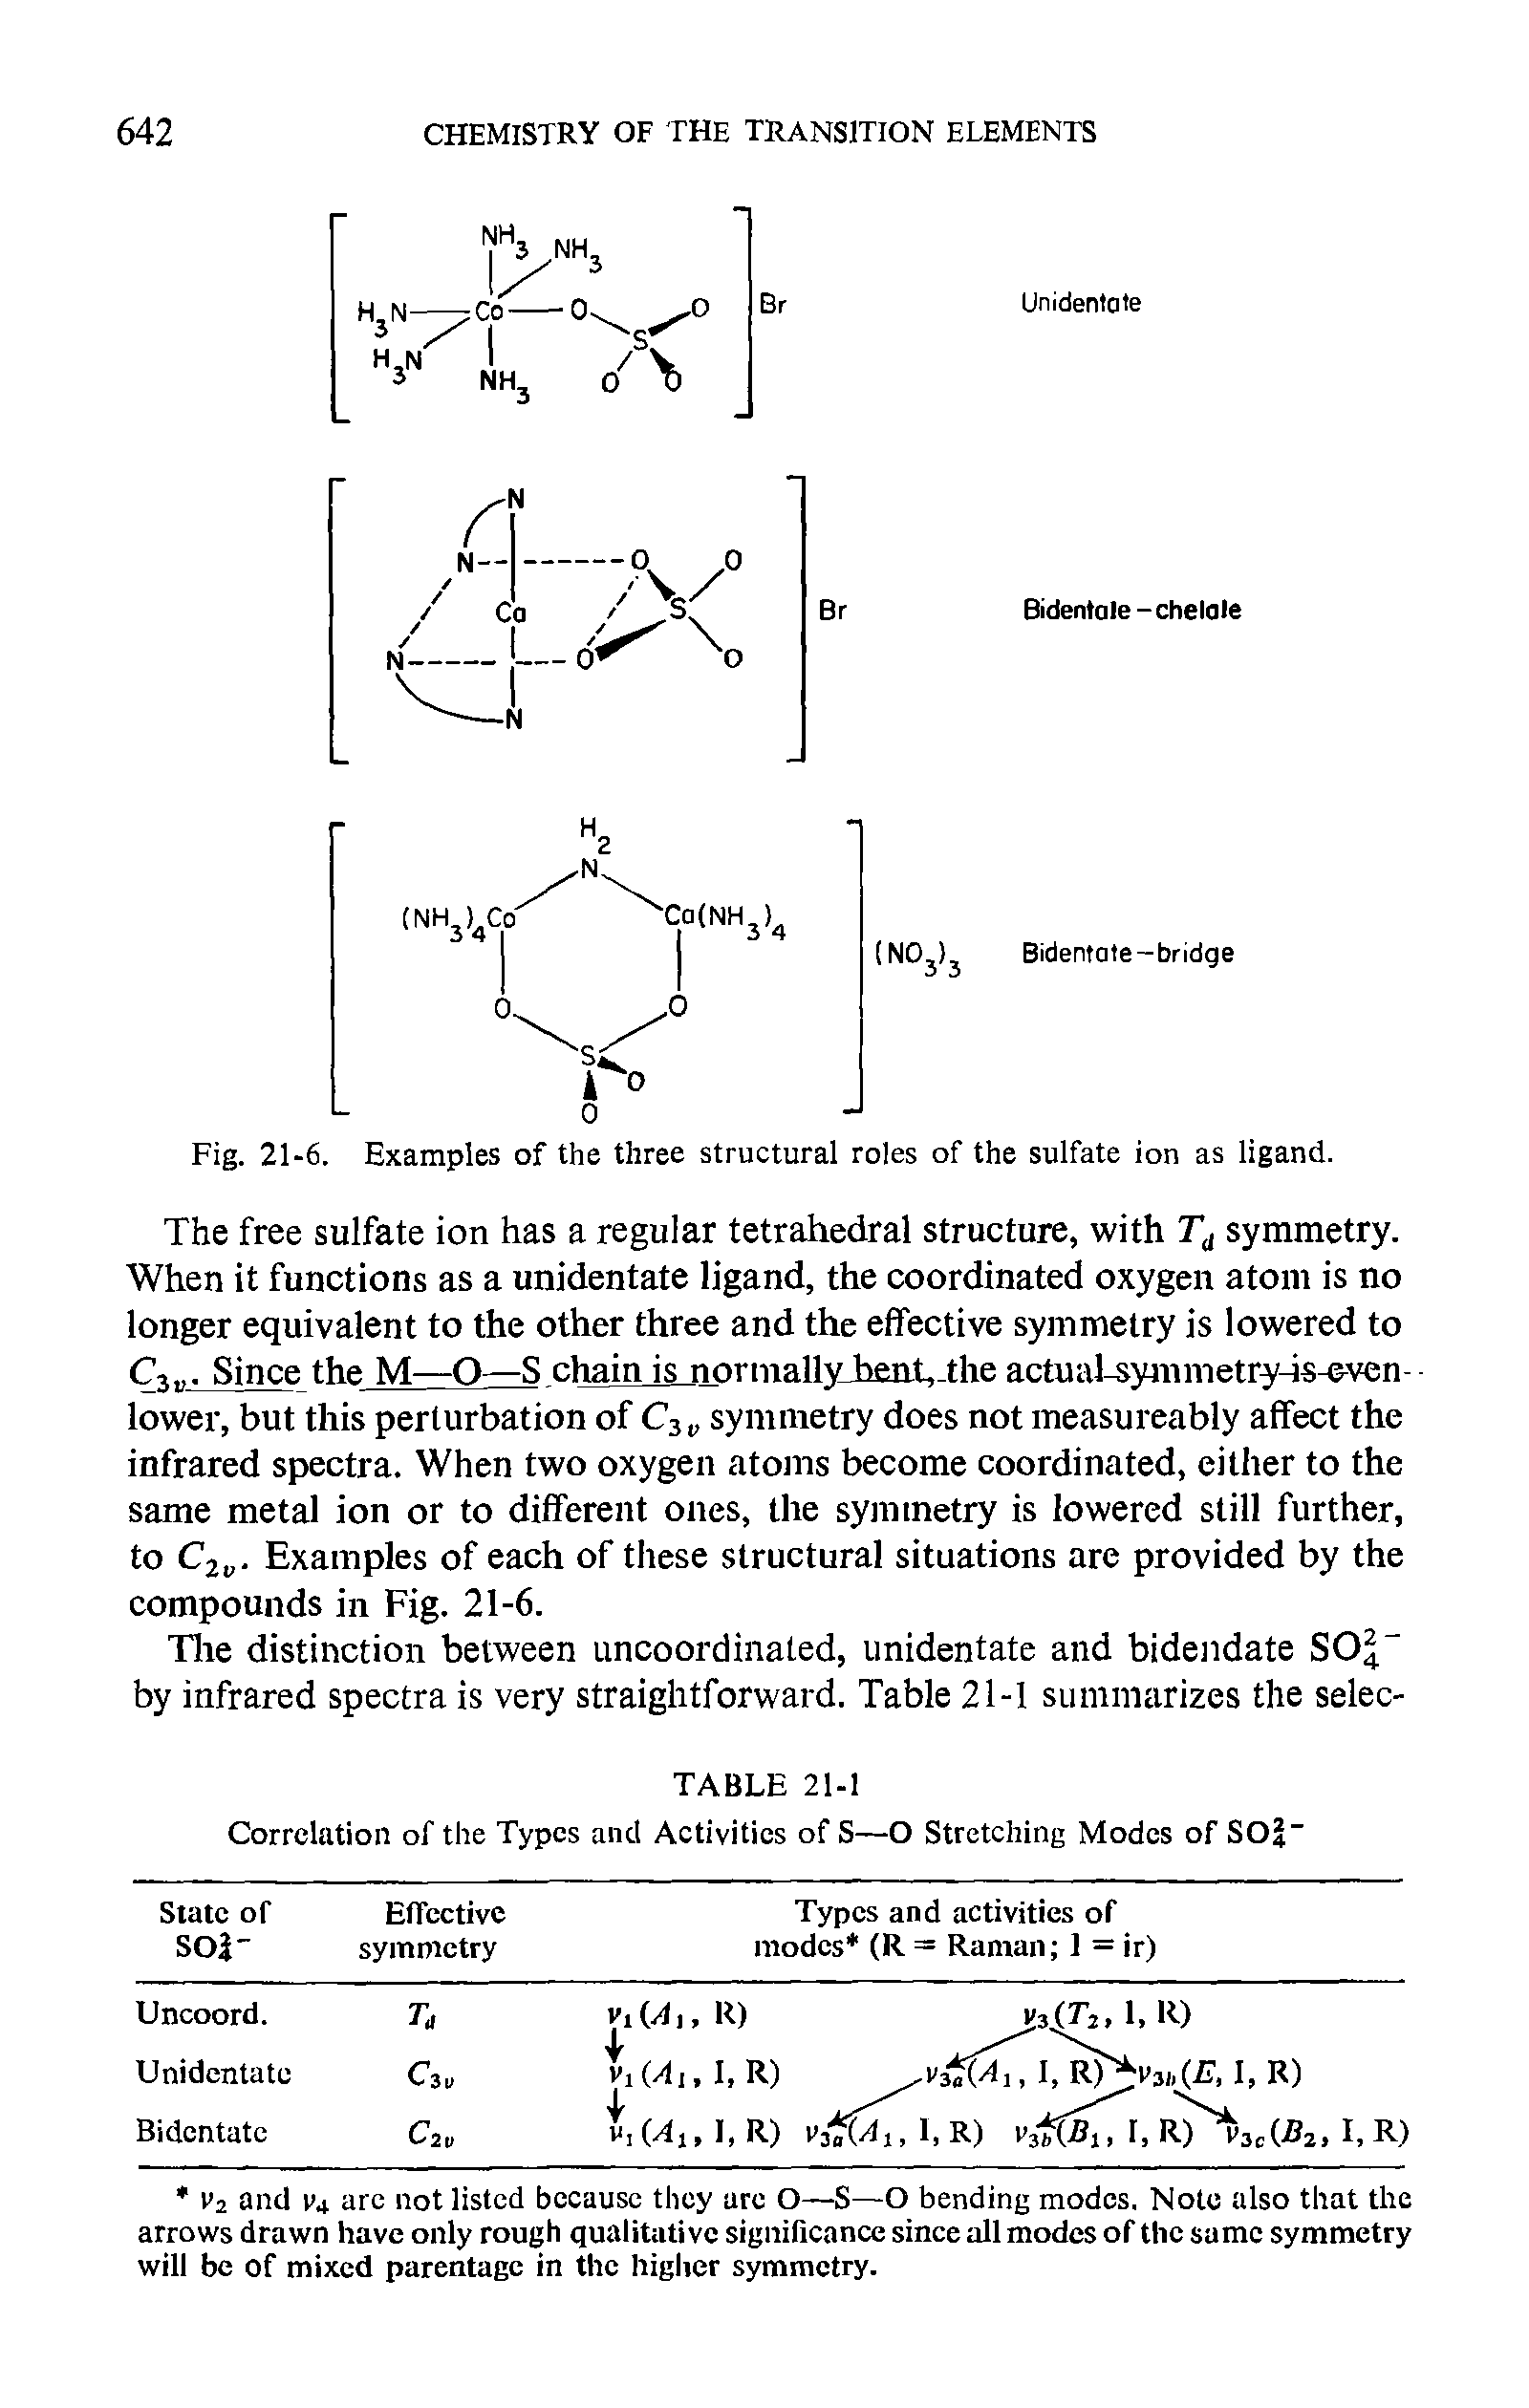 Fig. 21-6. Examples of the three structural roles of the sulfate ion as ligand.